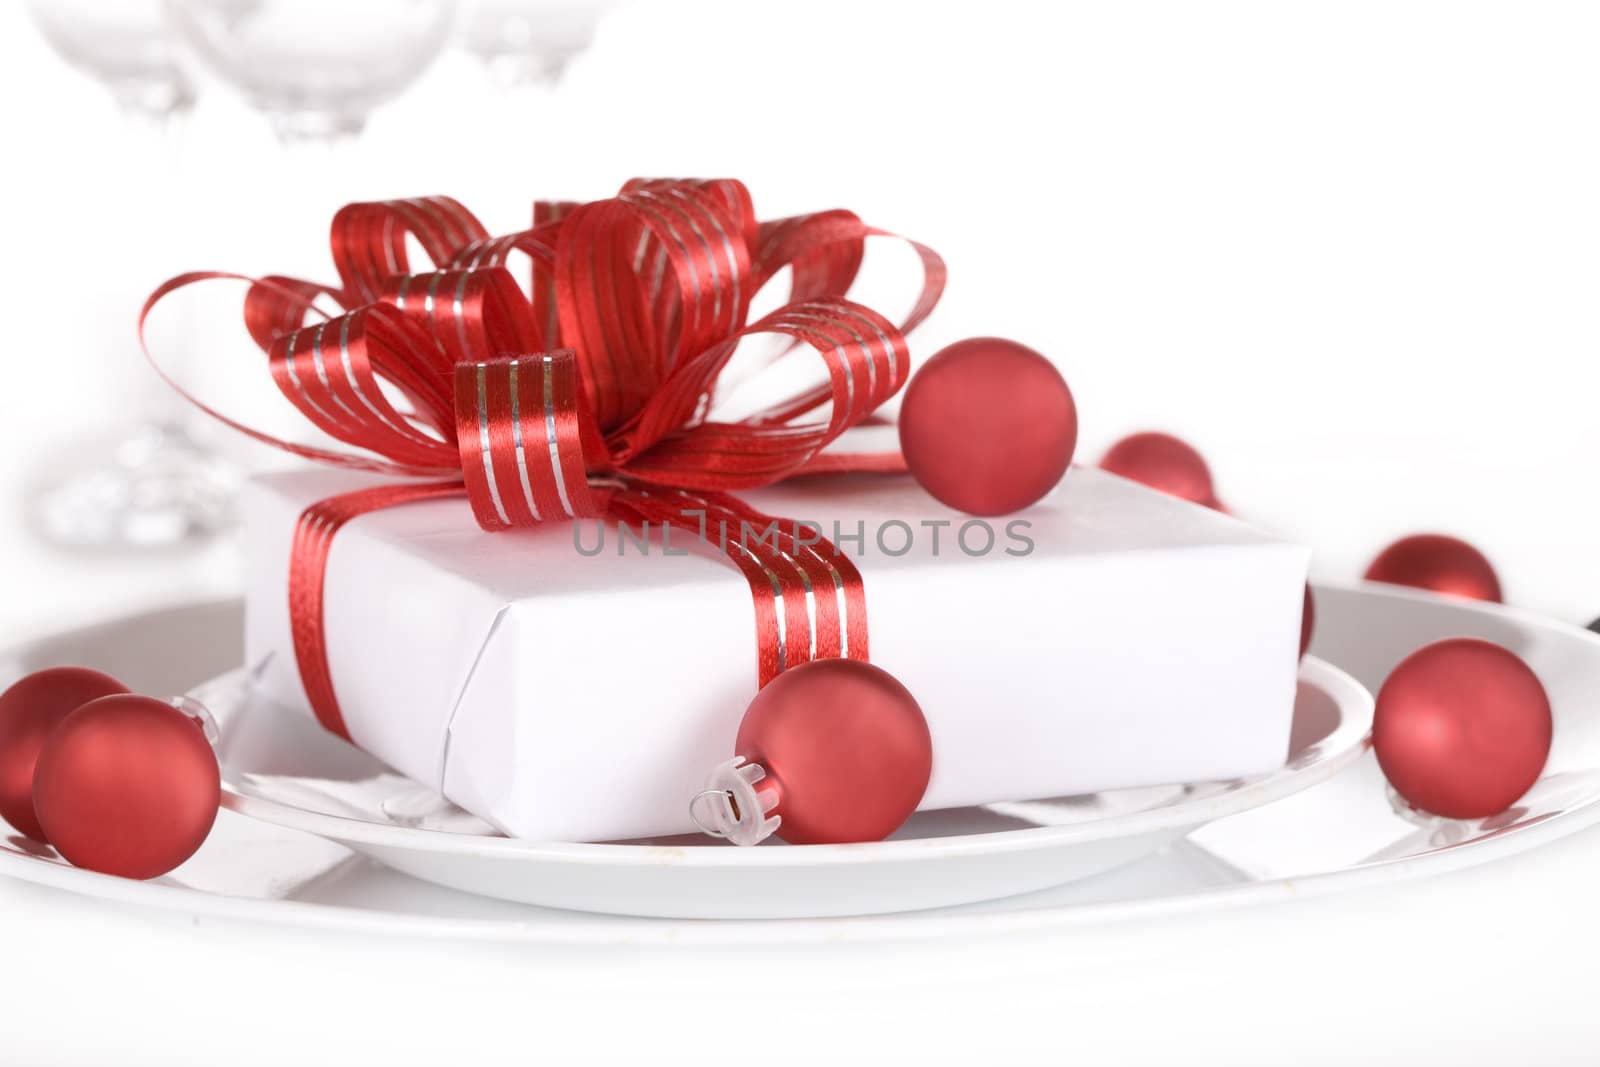 White present with red ribbons on a dinner plate by jarenwicklund